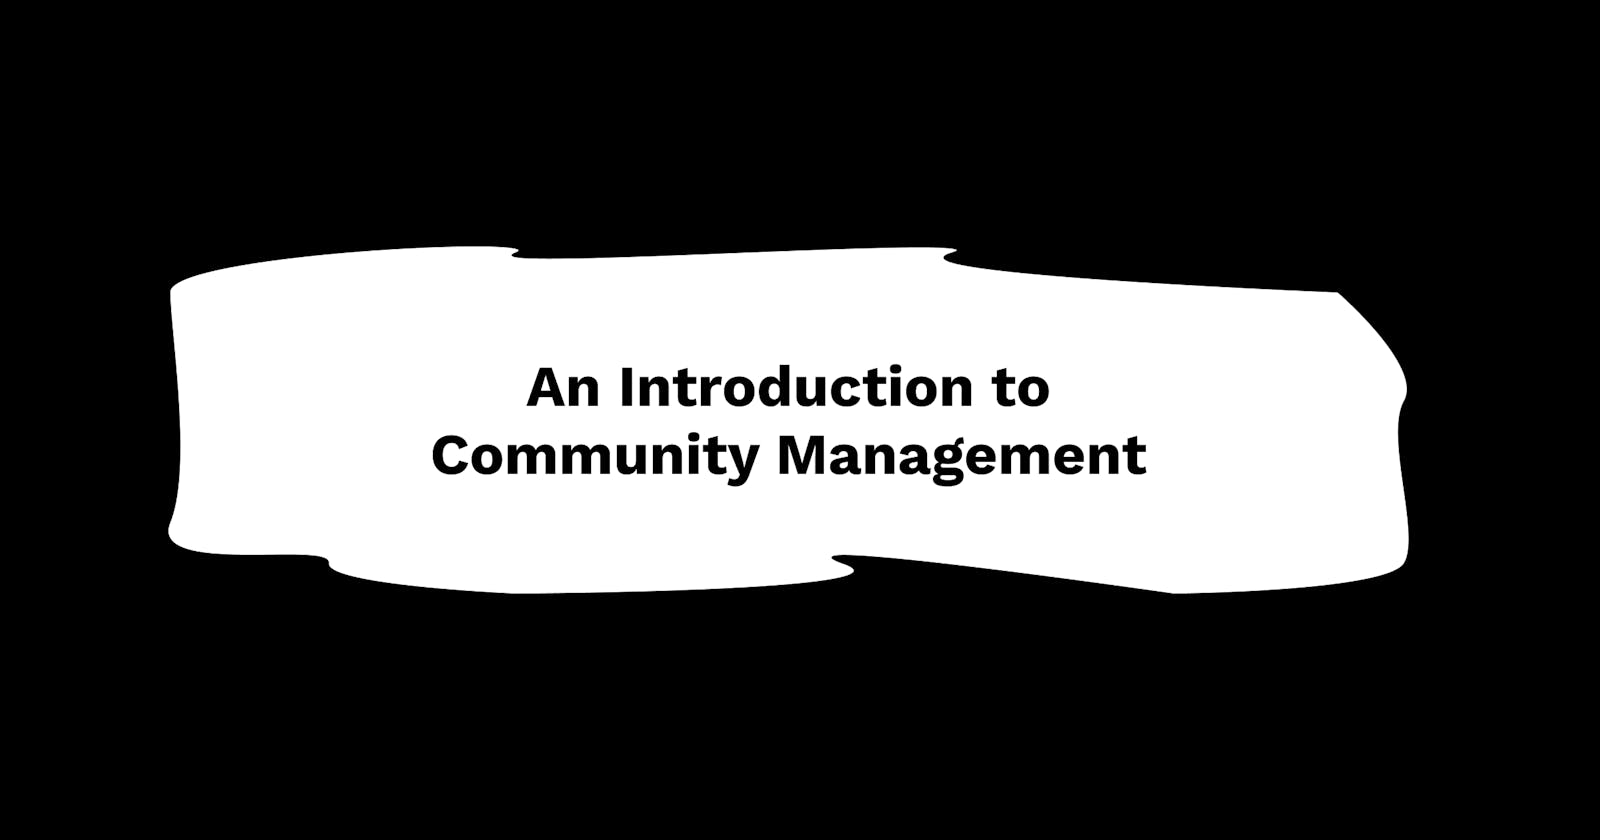 An Introduction to Community Management